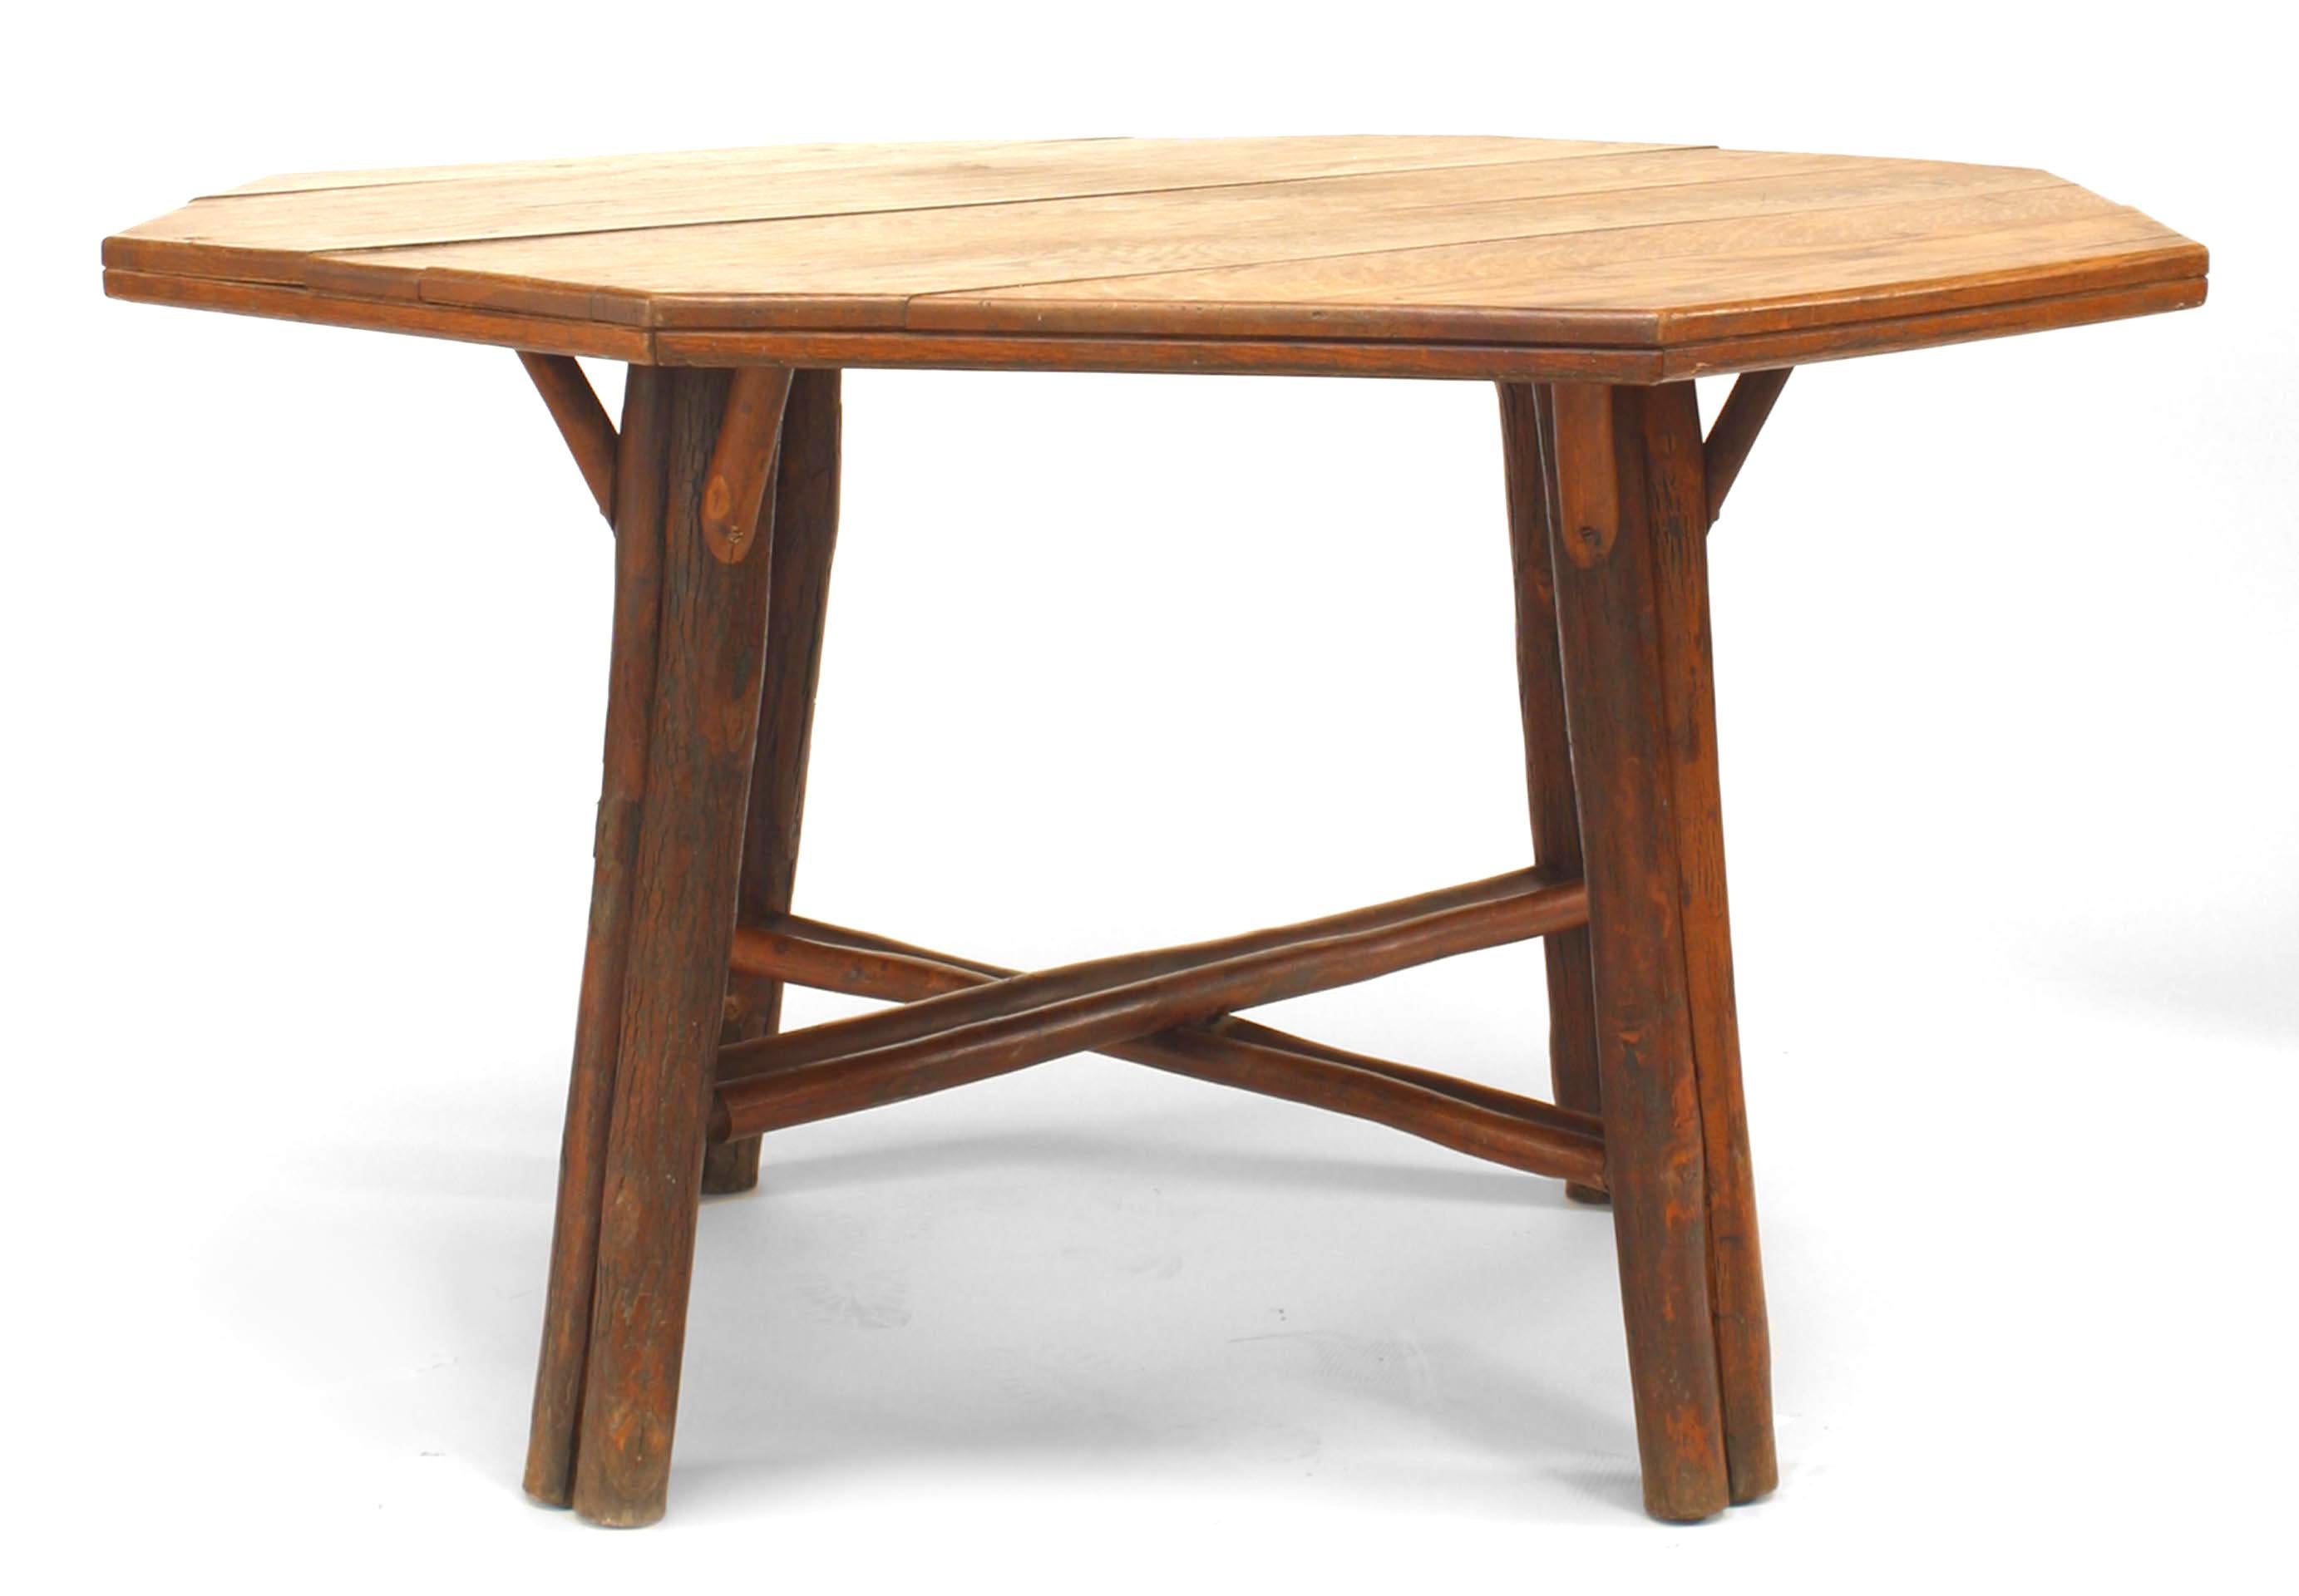 American rustic dining table with an octagonal oak plank top above four double legs united by an intersecting stretcher. Branded 